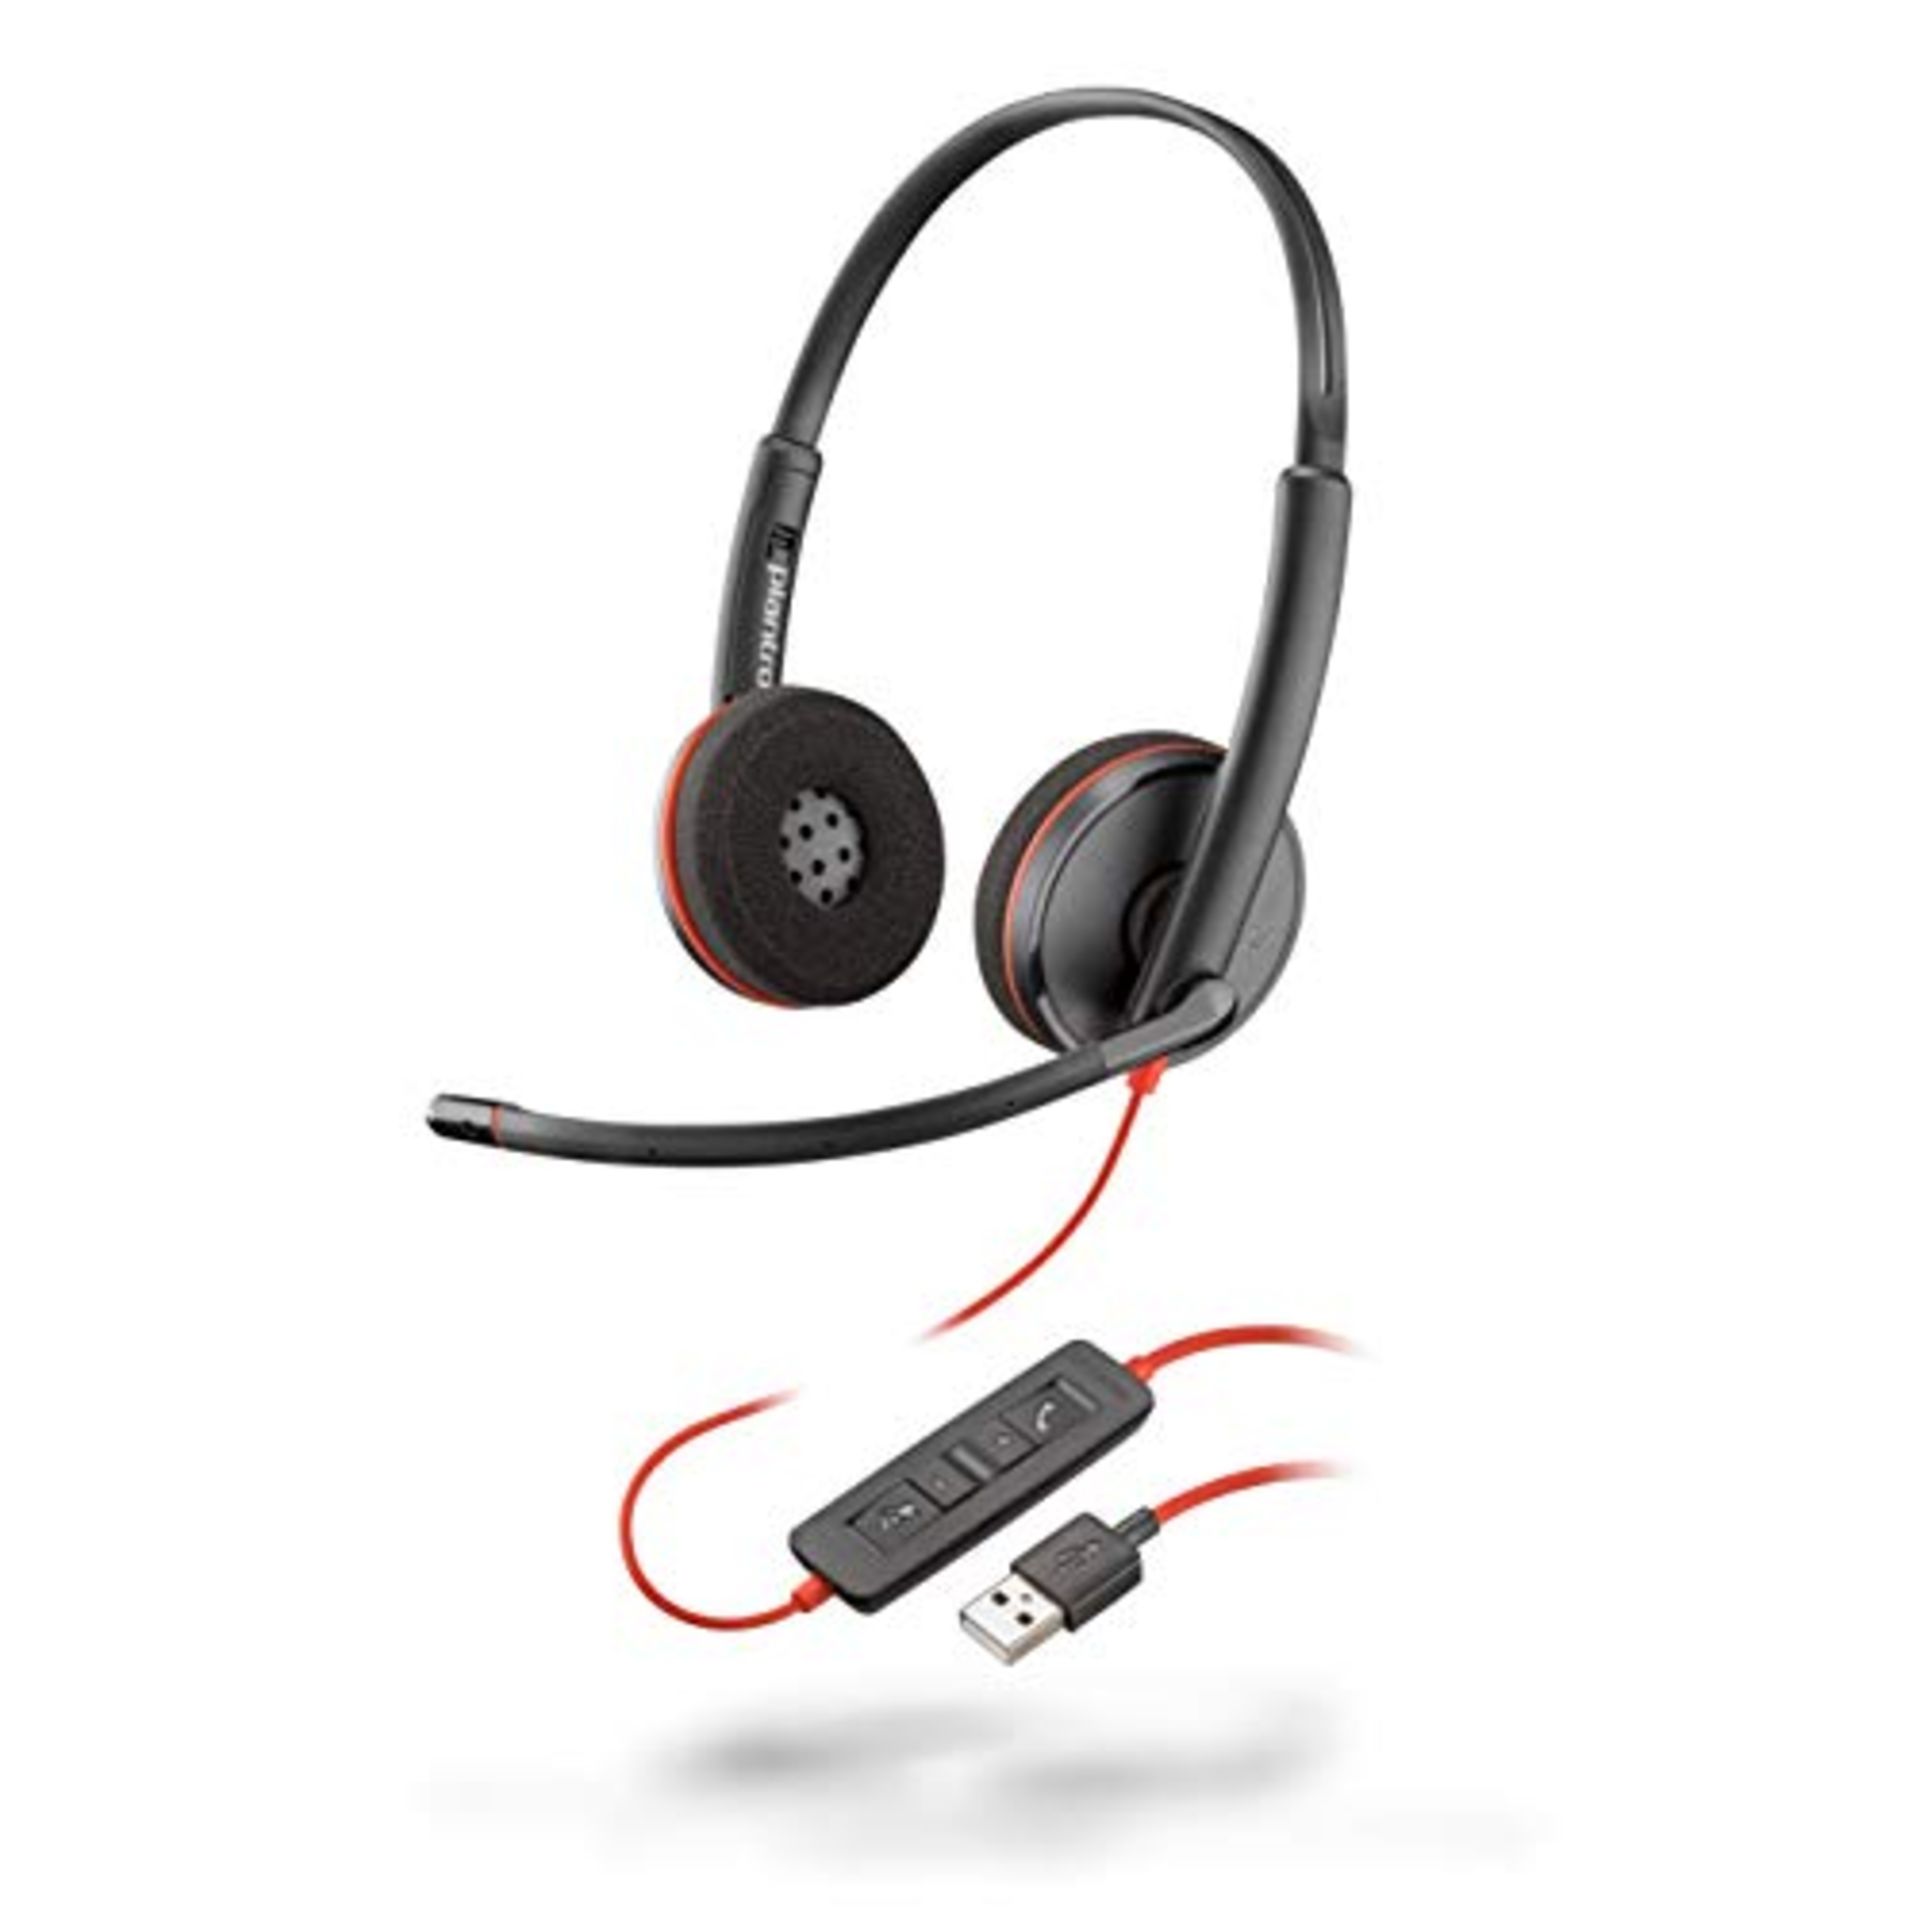 Plantronics - Blackwire 3220 USB-A Wired Headset - Dual Ear (Stereo) with Boom Mic - Connect to PC/